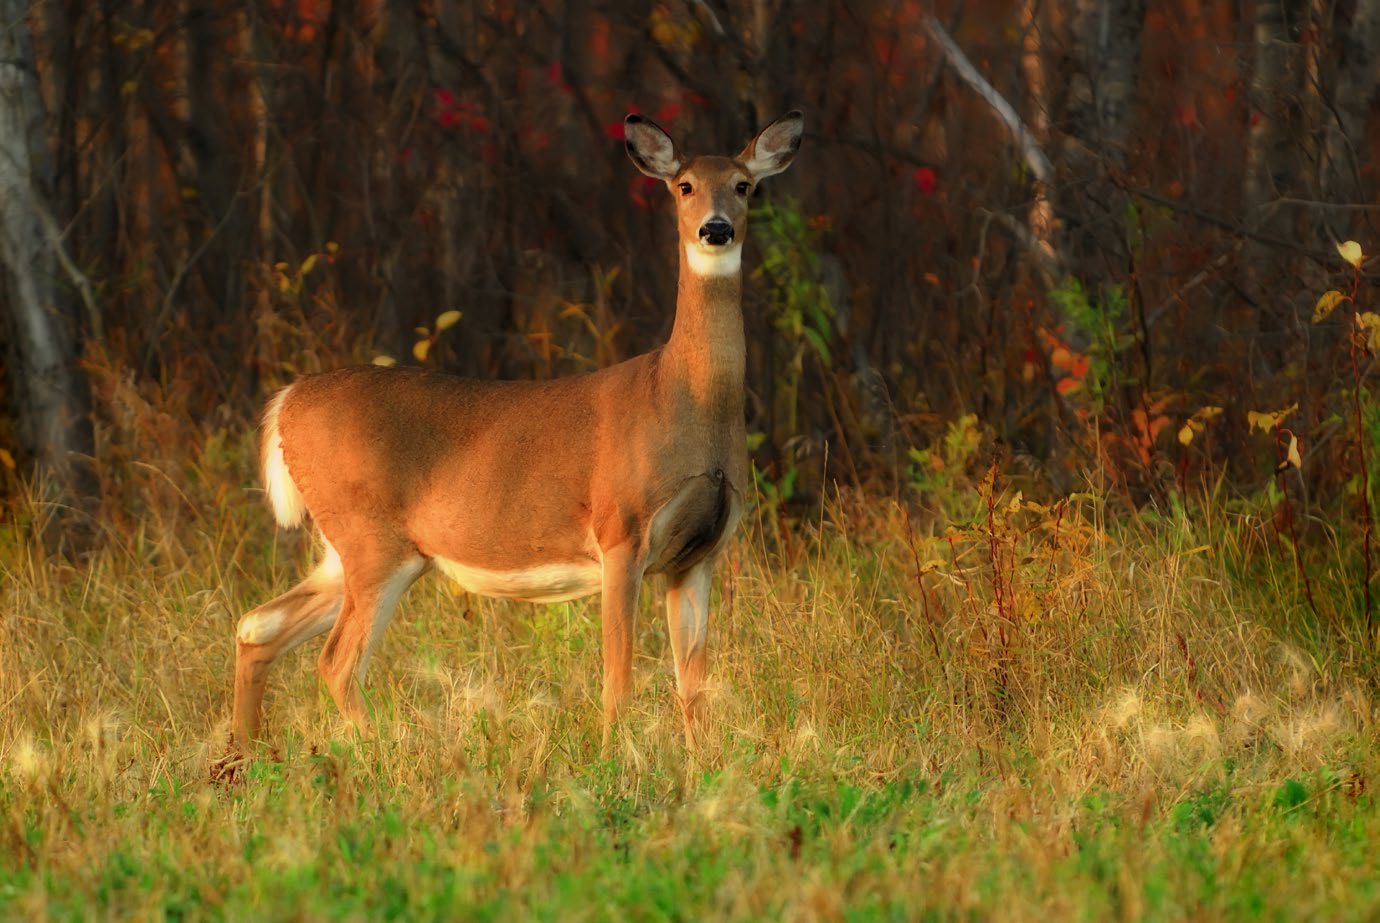 A white-tailed doe stands in a grassy clearing, looking directly at the camera. An autumn forest is visible in the background.